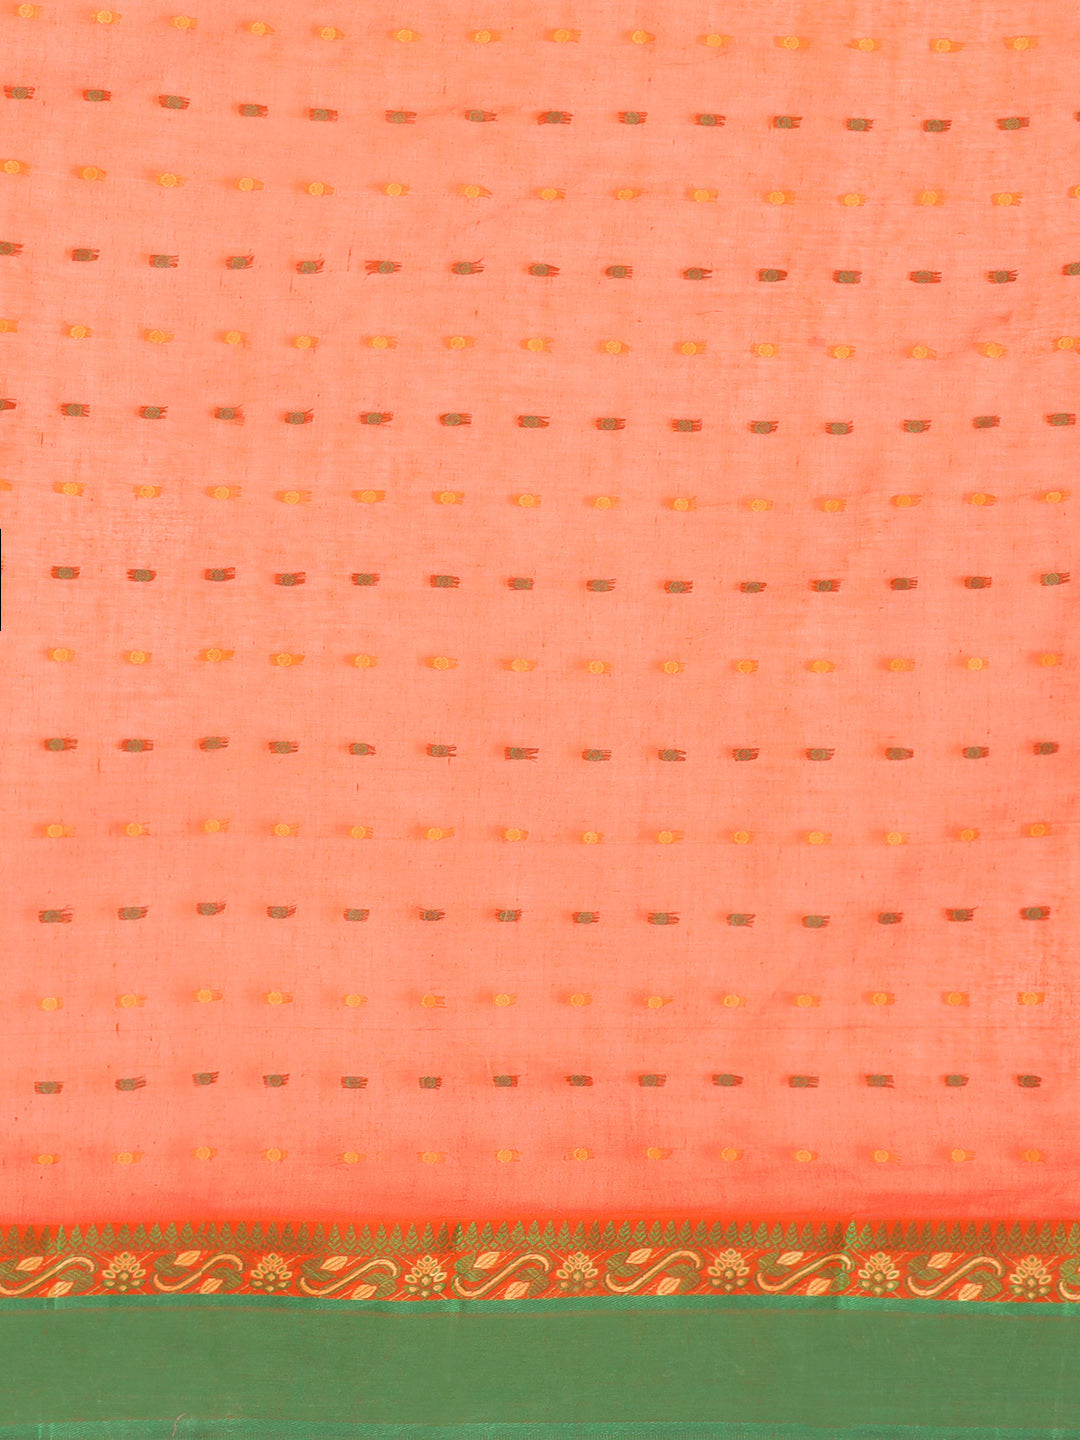 Orange Tant Woven Design Saree Without Blouse Piece DUTASA023 DUTASA023-Saree-Kalakari India-DUTASA023-Geographical Indication, Hand Crafted, Heritage Prints, Natural Dyes, Sarees, Silk Cotton, Sustainable Fabrics, Taant, Tant, West Bengal, Woven-[Linen,Ethnic,wear,Fashionista,Handloom,Handicraft,Indigo,blockprint,block,print,Cotton,Chanderi,Blue, latest,classy,party,bollywood,trendy,summer,style,traditional,formal,elegant,unique,style,hand,block,print, dabu,booti,gift,present,glamorous,affordab